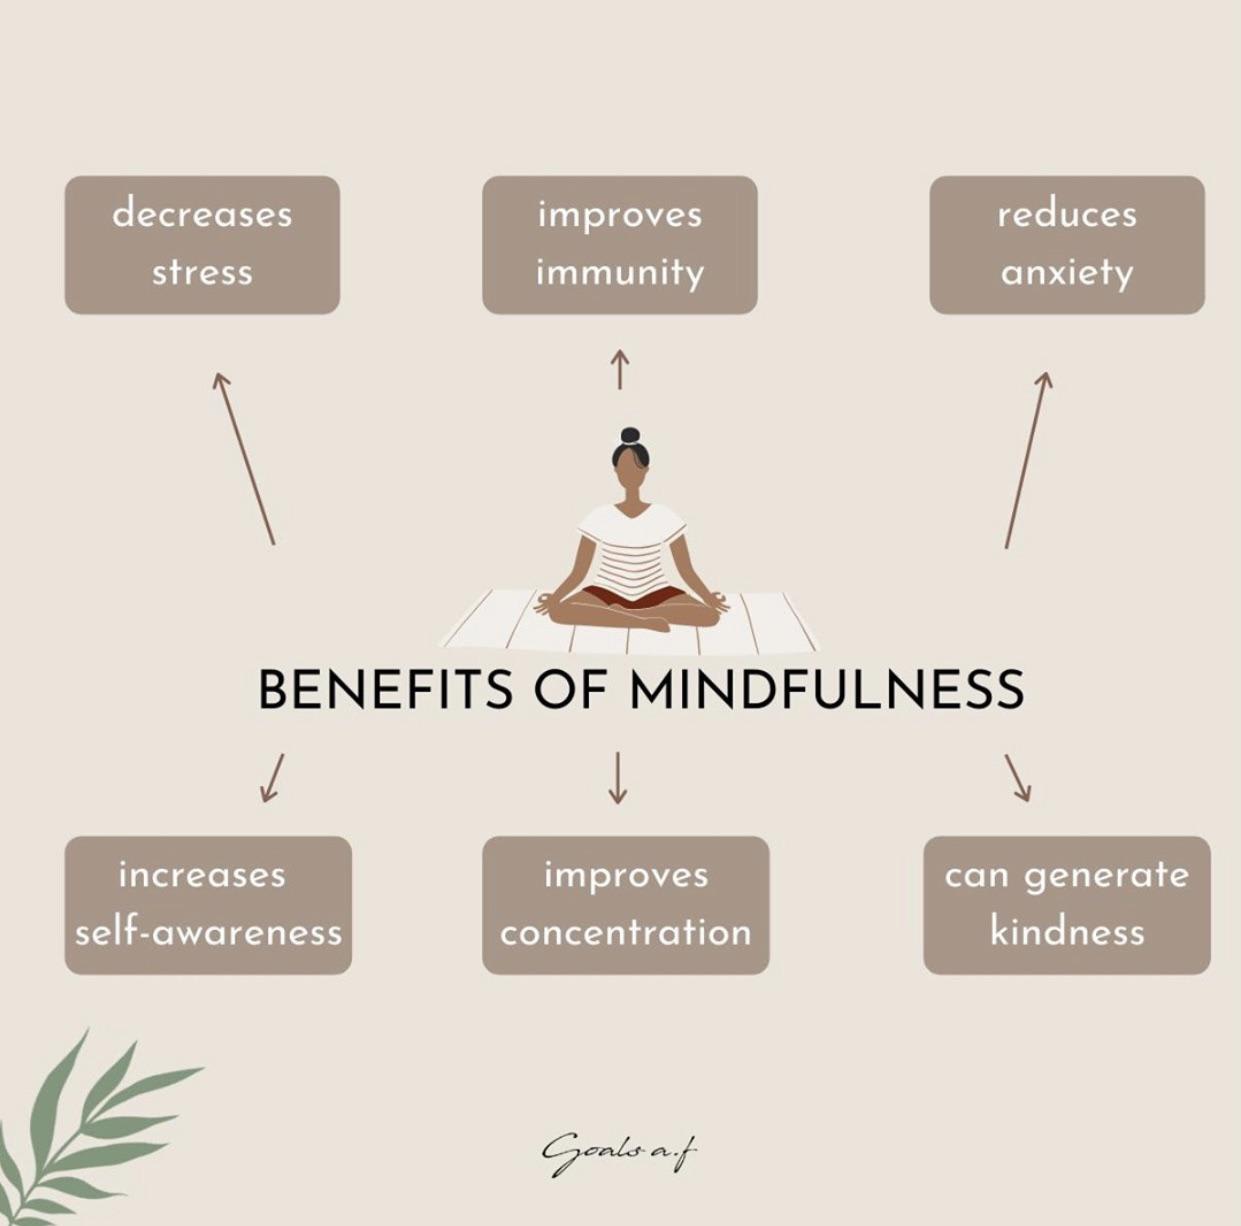 Benefits of Mindfulness. They don’t mention some big ones: clarity, contentment and happiness.